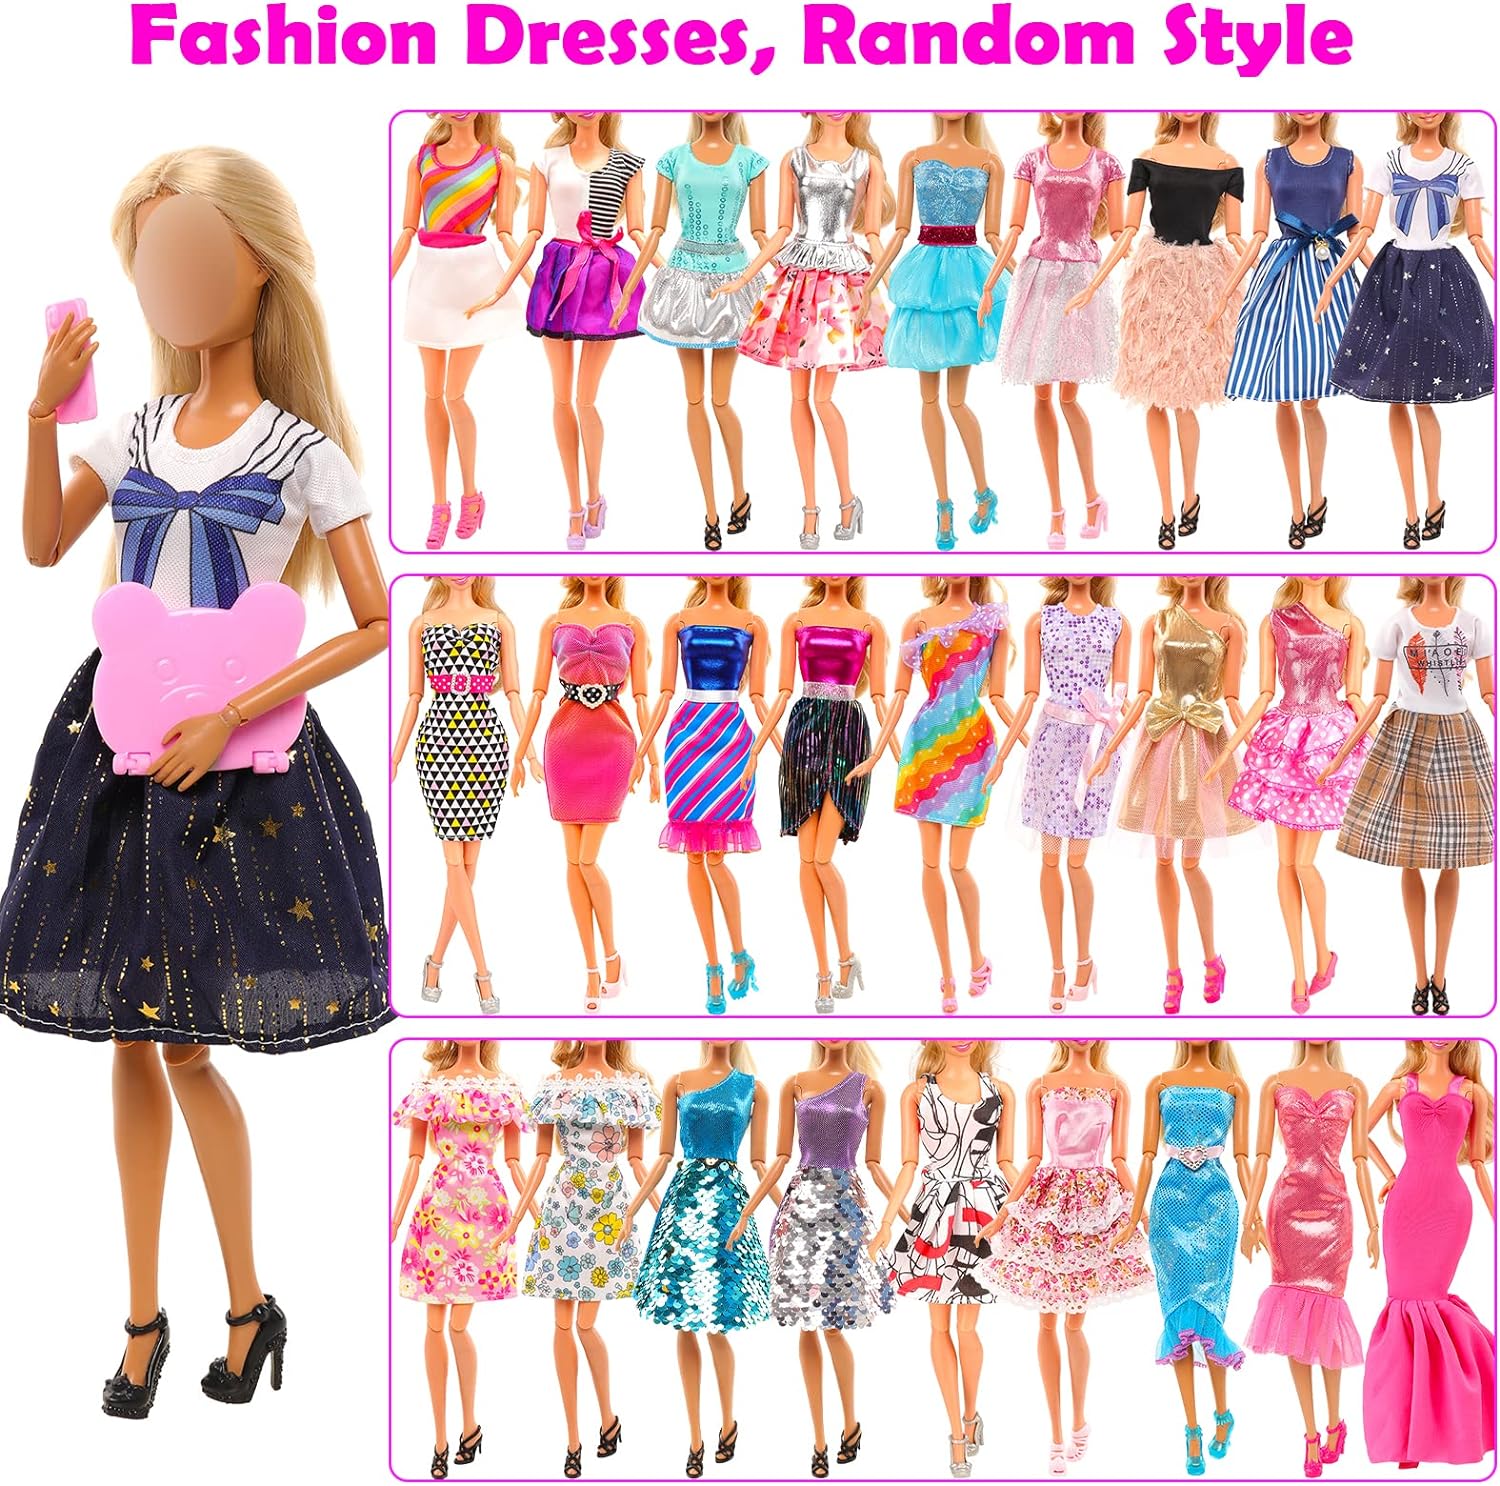 BARWA 57 Pack Doll Clothes and Accessories 5 Fashion Dresses 4 Tops 4 Pants Outfits 3 Wedding Gown Dresses 3 Swimsuits Bikini 5 Mini Dresses, 10 Hangers 15 Shoes Computer Cosmetic for 11.5 inch Doll